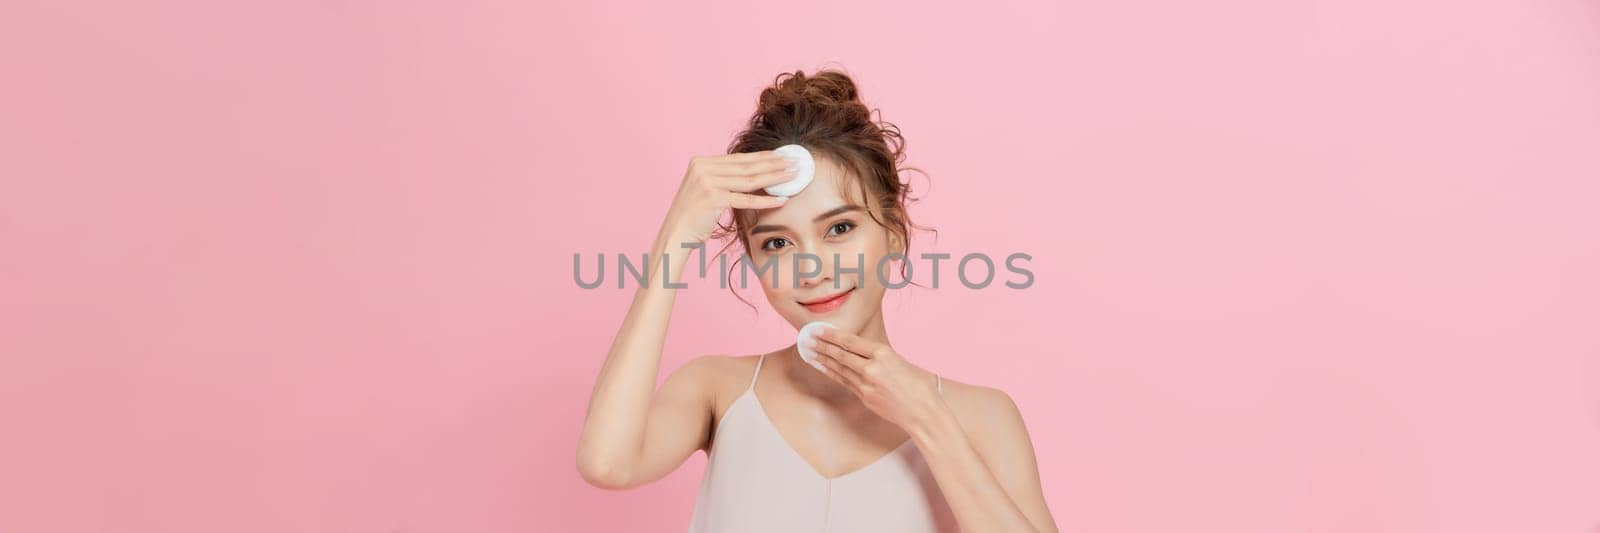 Woman removing makeup, holds cotton pads near face.  by makidotvn